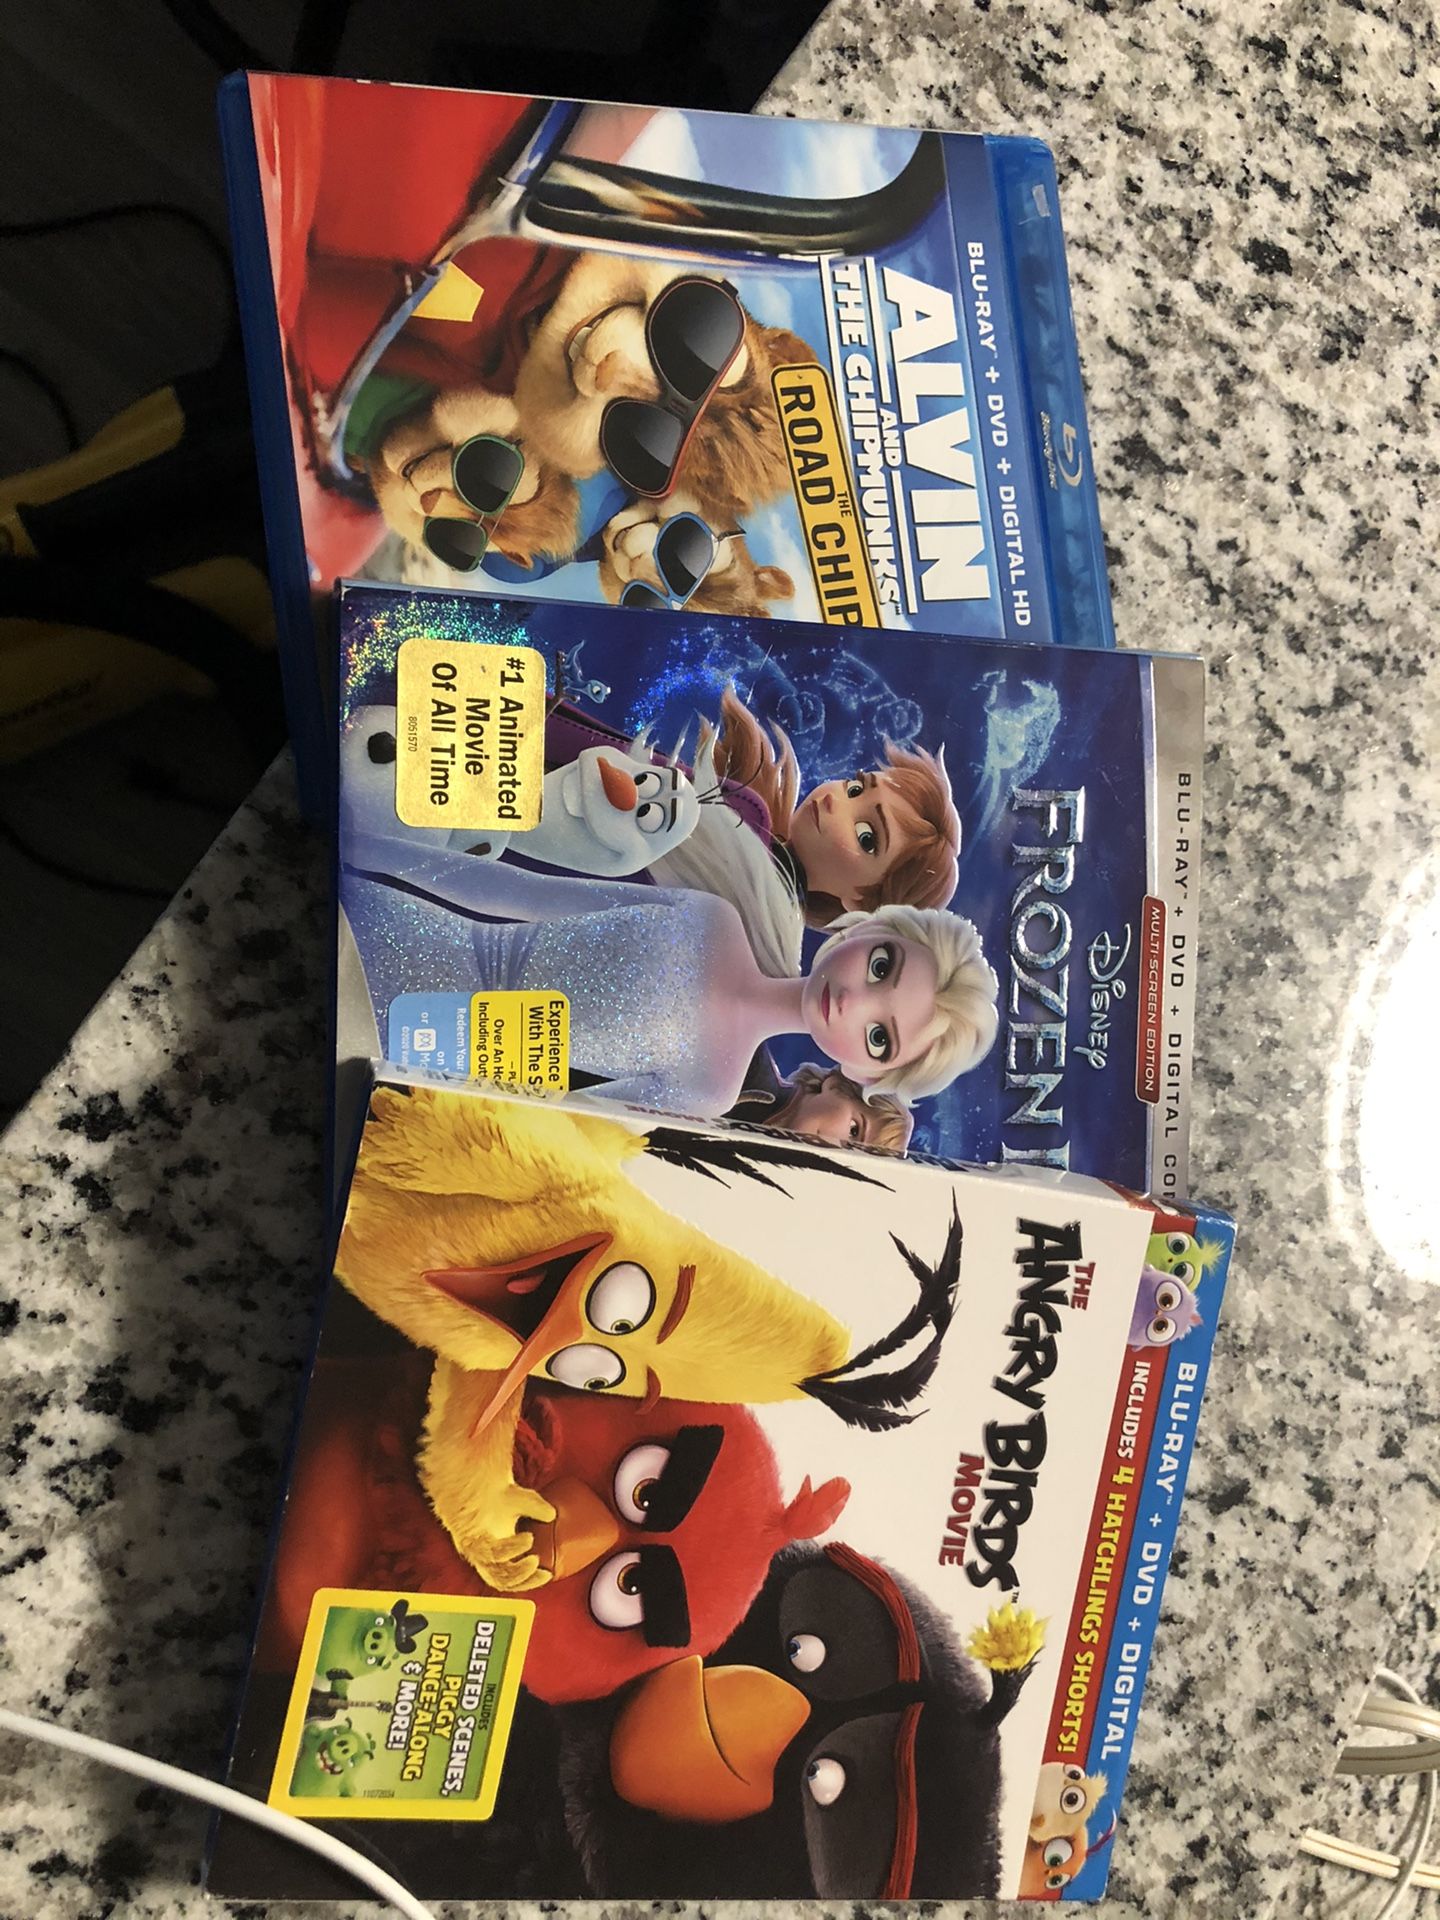 3 DVD and blue rays movies